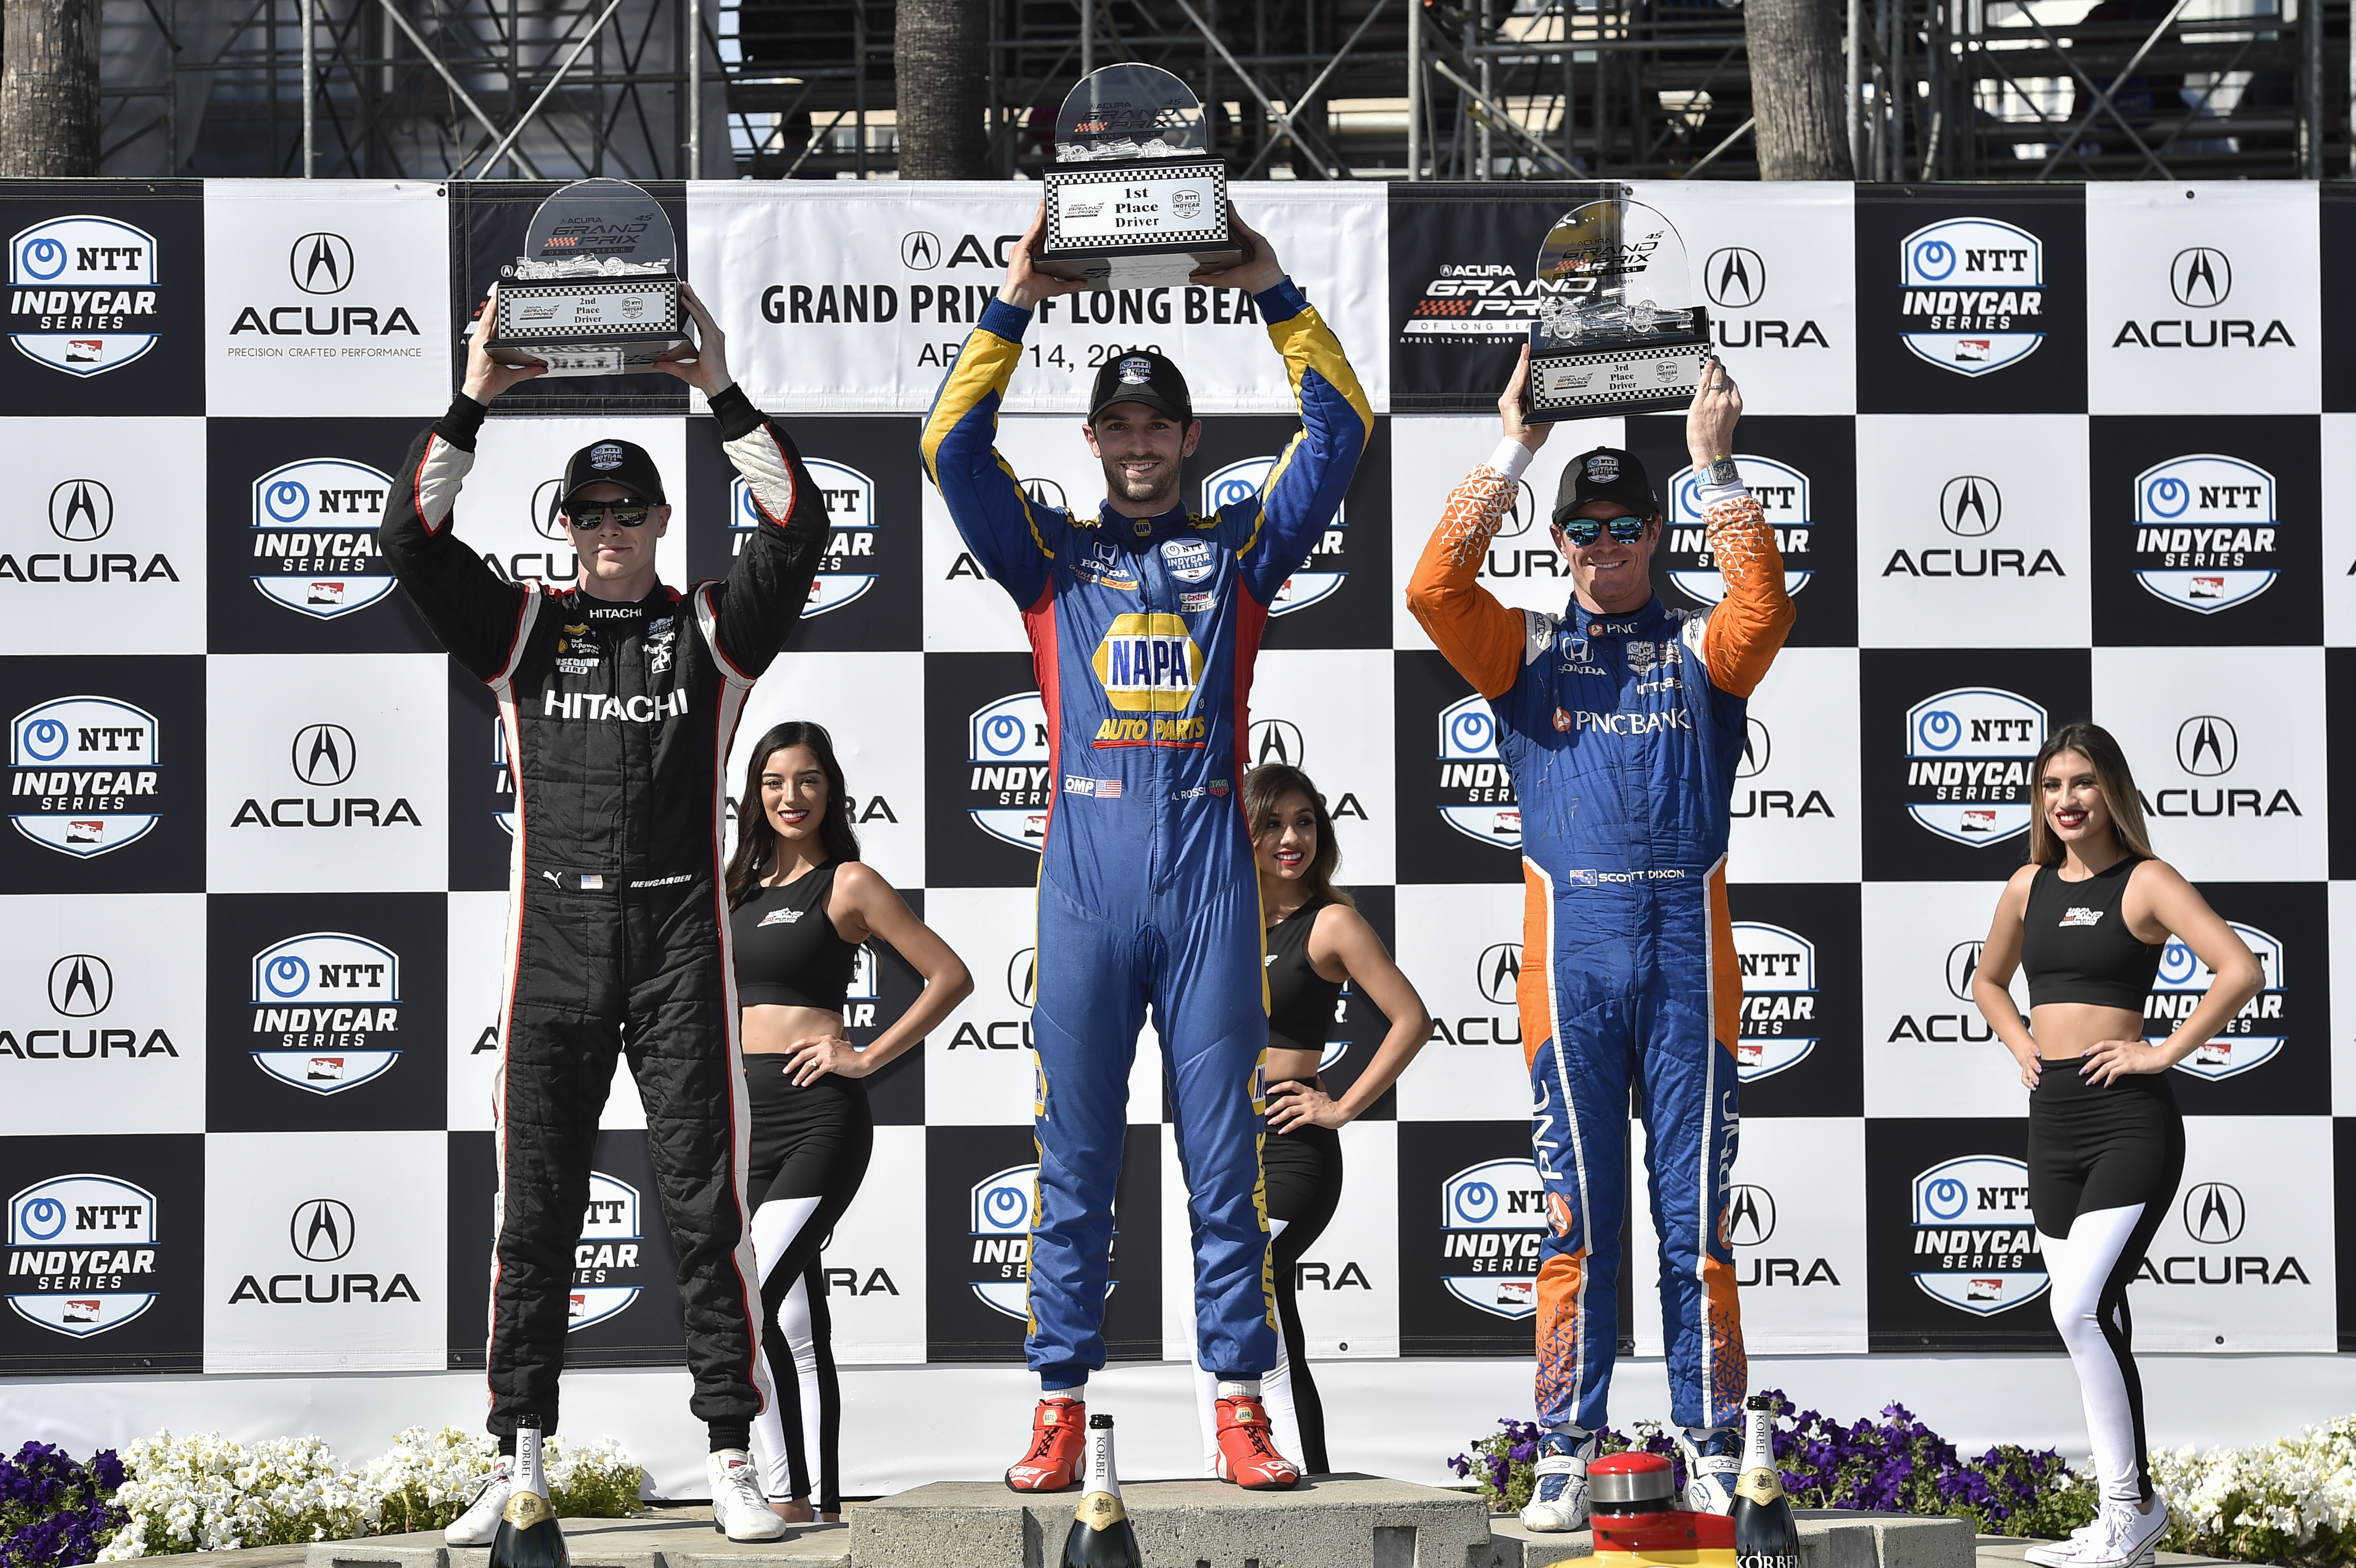 Rossi Races Away to Second Straight Dominant Long Beach Triumph